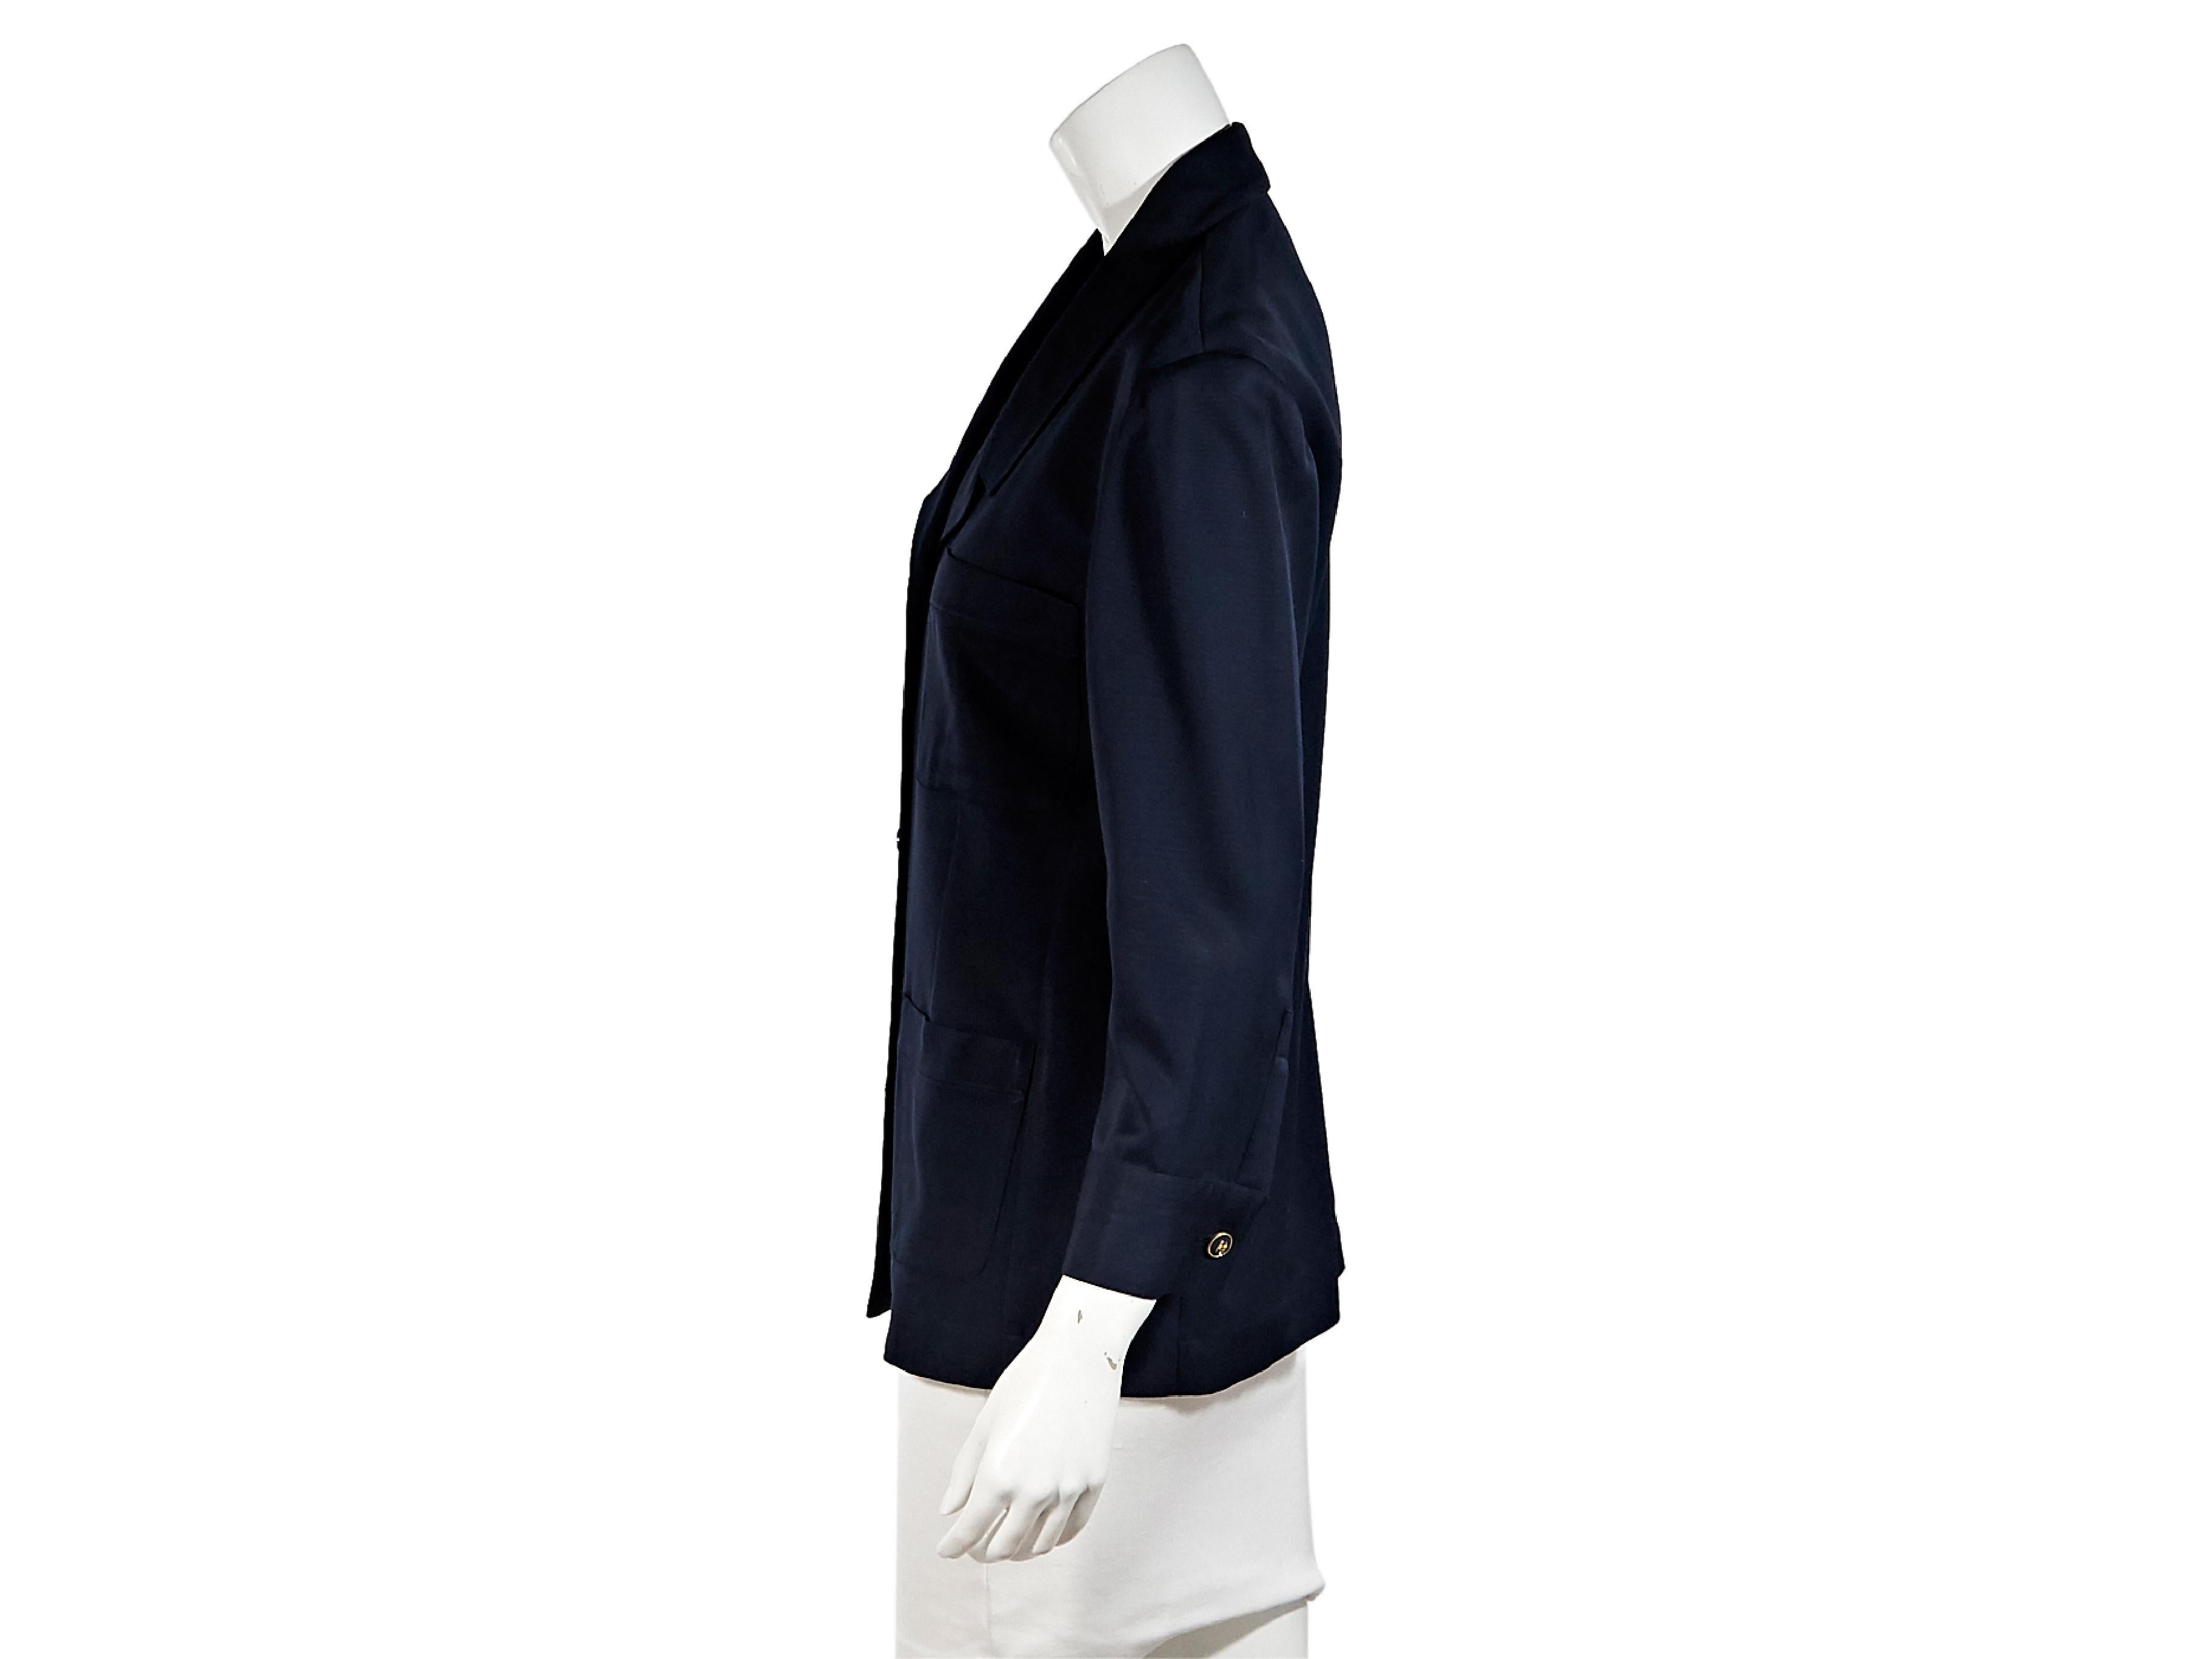 Product details:  Vintage navy blue blazer by Chanel.  Notched lapel.  Long sleeves.  French cuffs.  Button-front closure.  Front patch pockets.  Goldtone hardware.  36